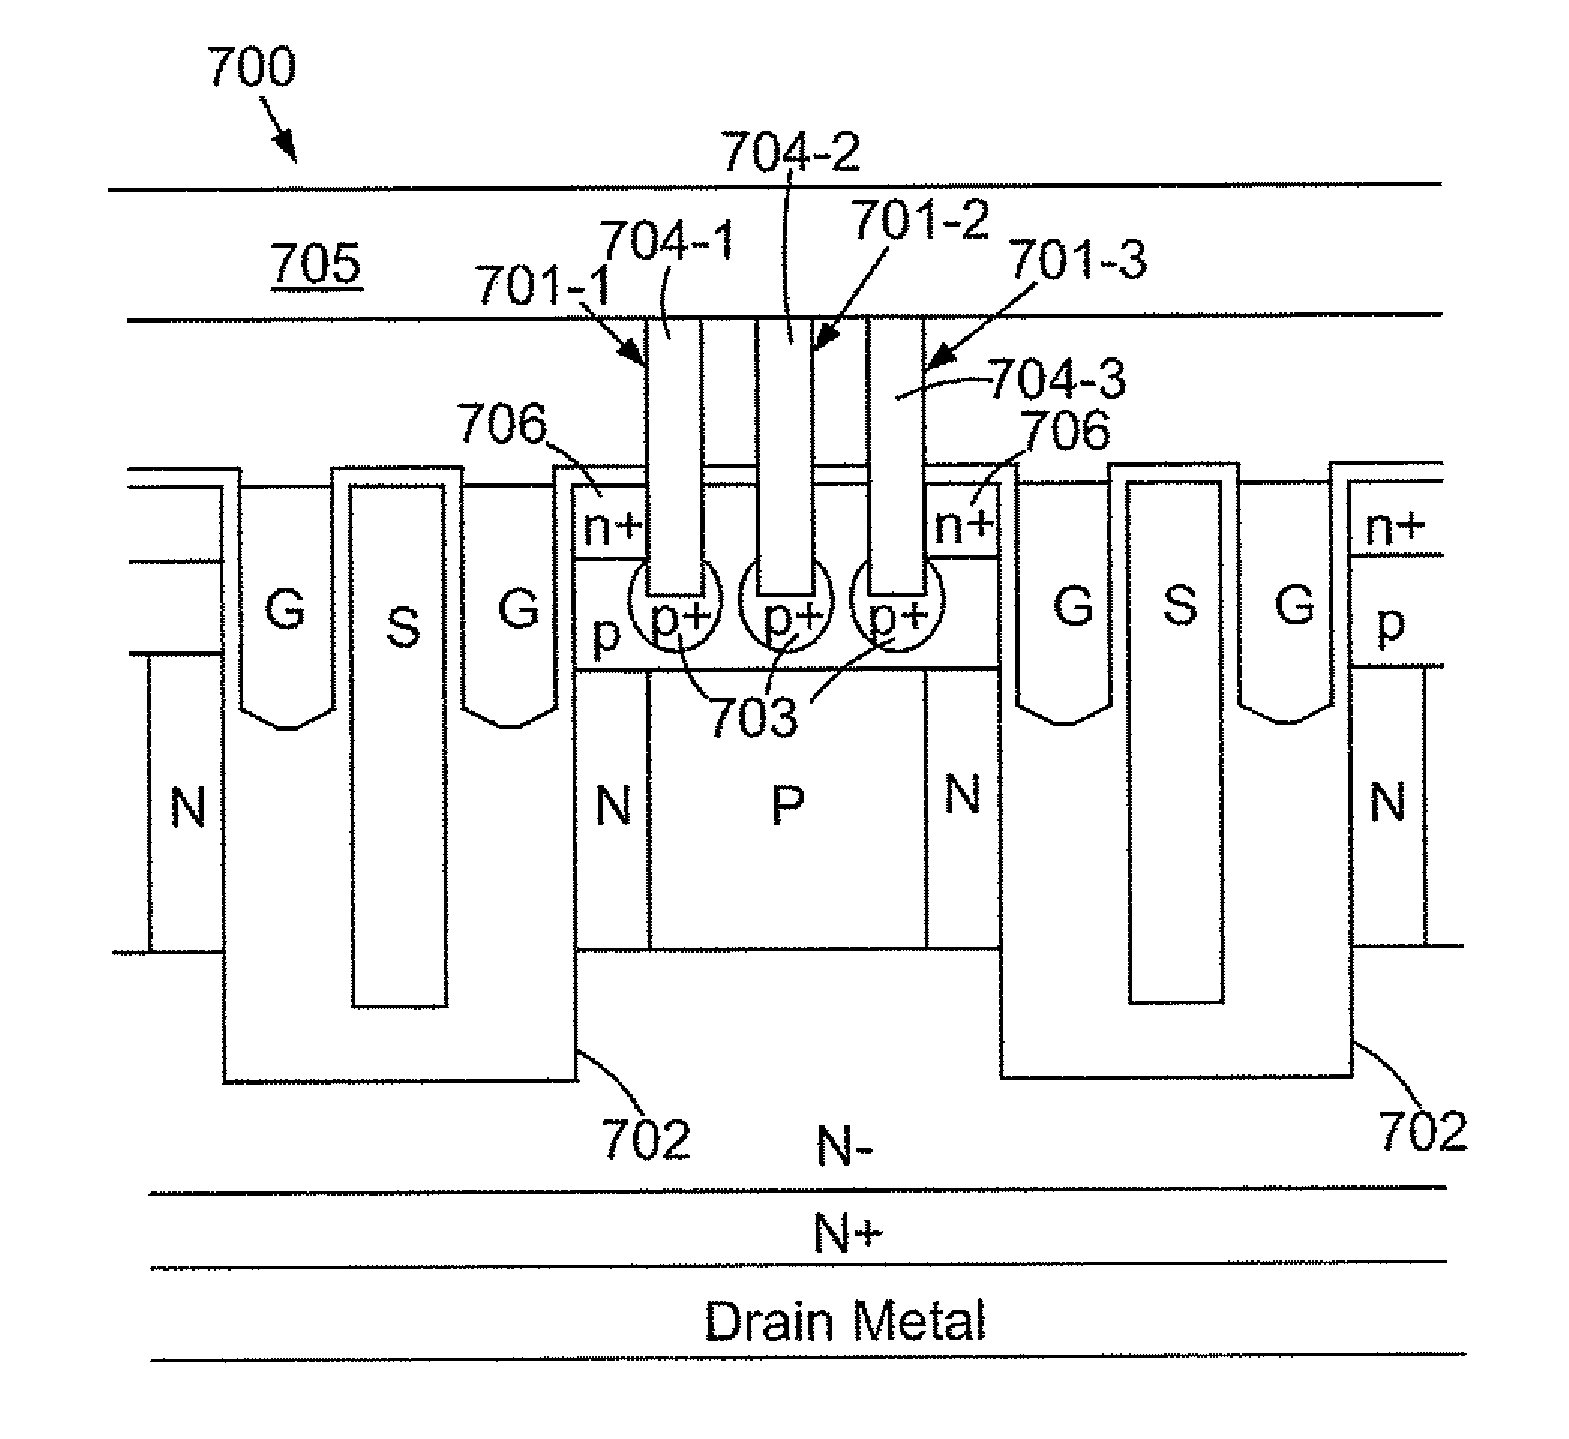 Super-junction trench MOSFET with multiple trenched source-body contacts